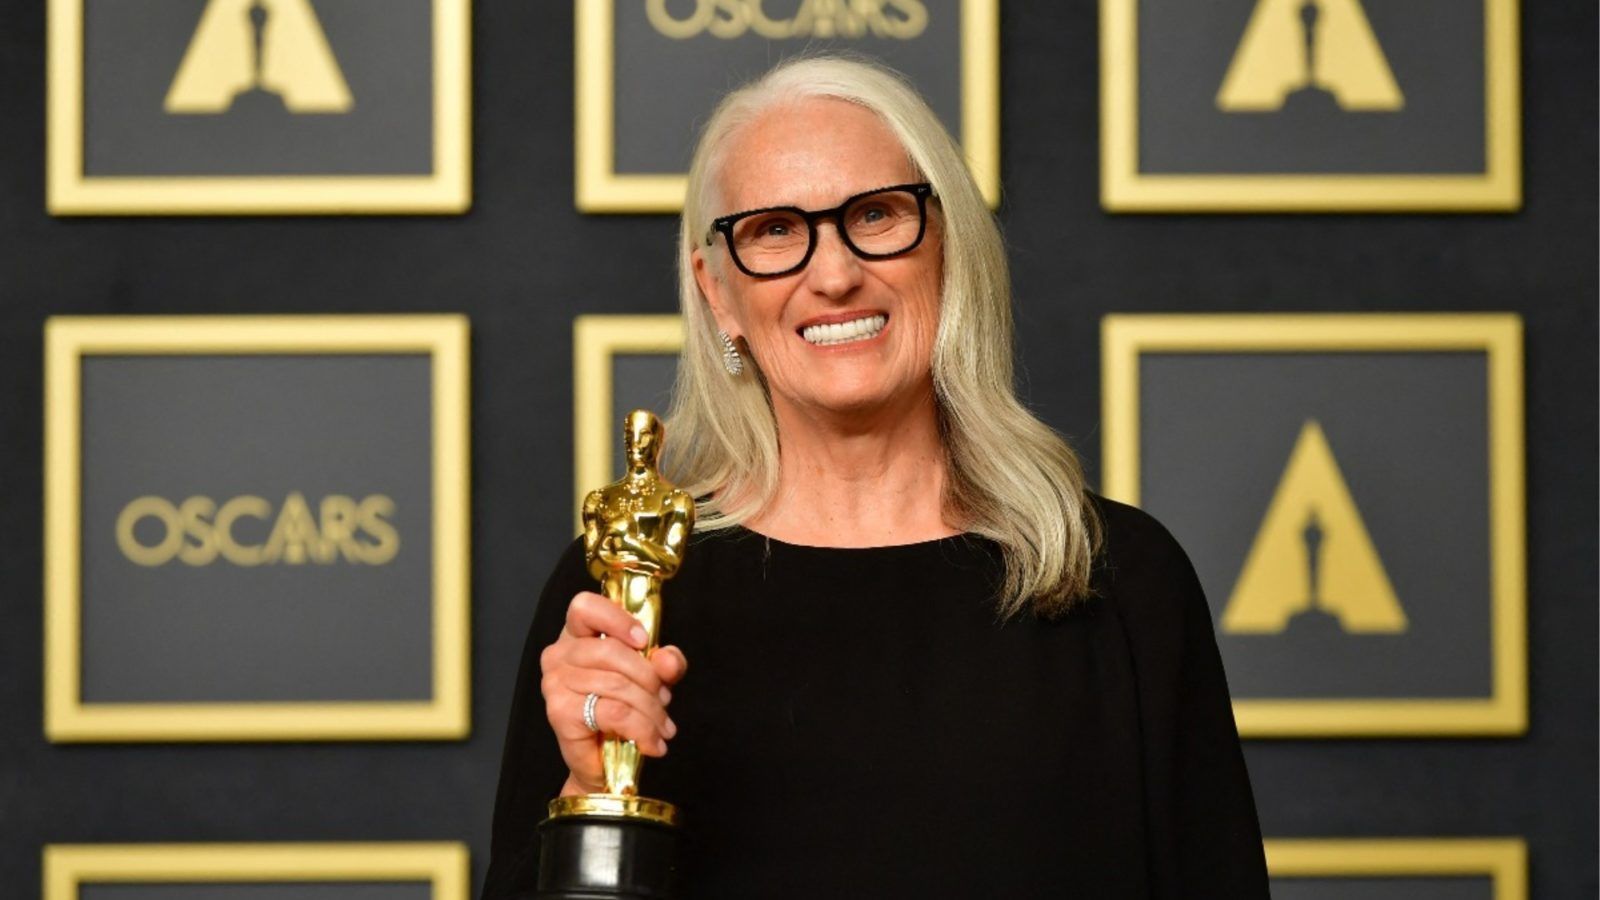 The women directors who have won the Best Director award at the Oscars